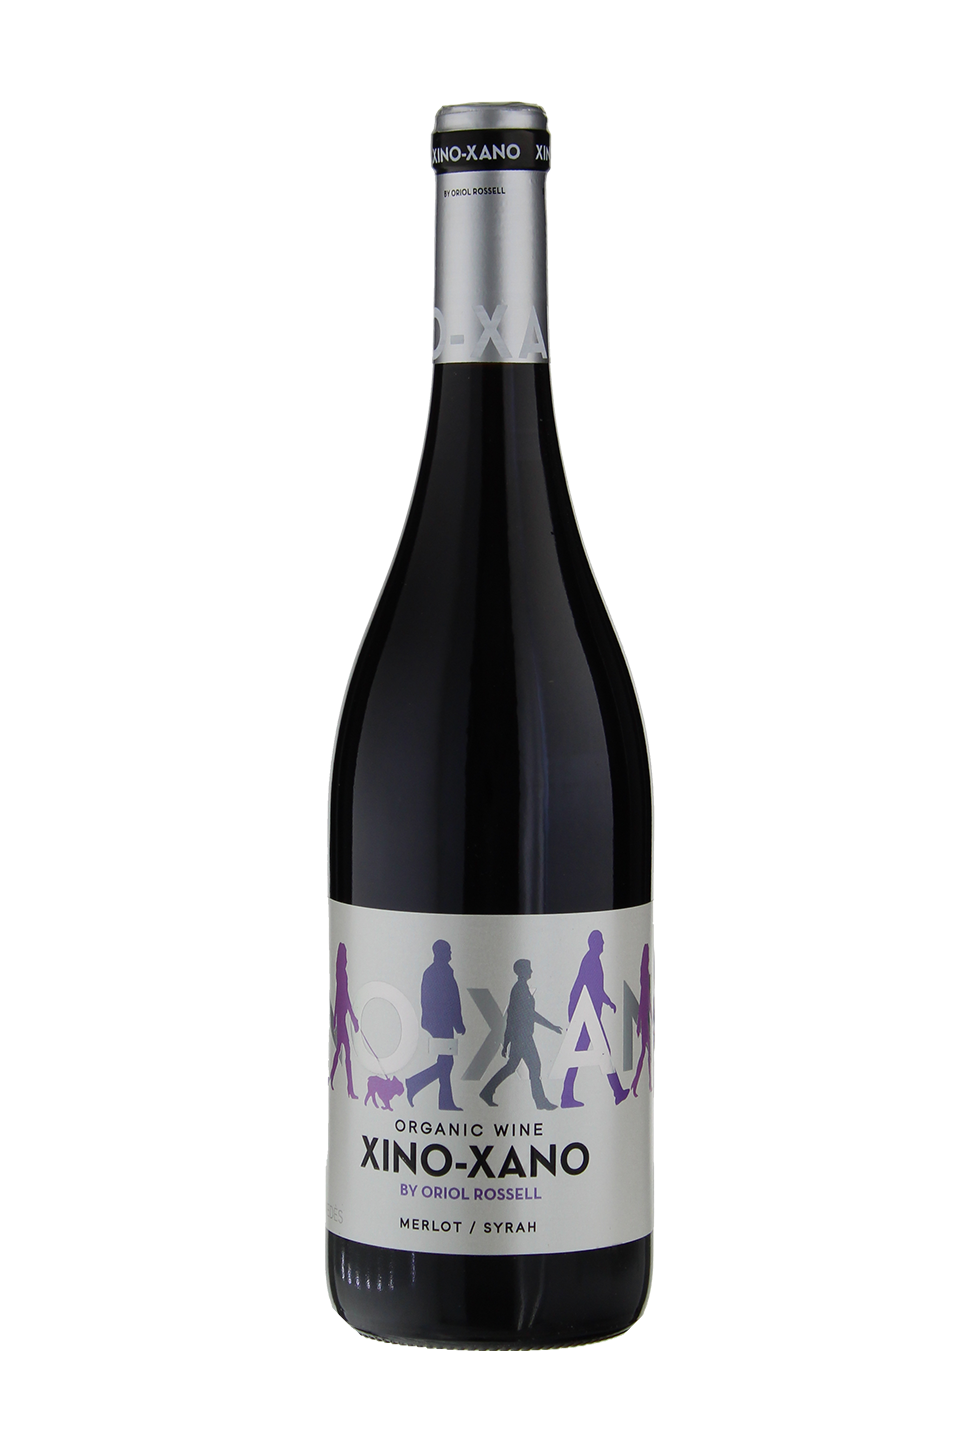 Oriol Rossell XINO-XANO Penedes D.O.